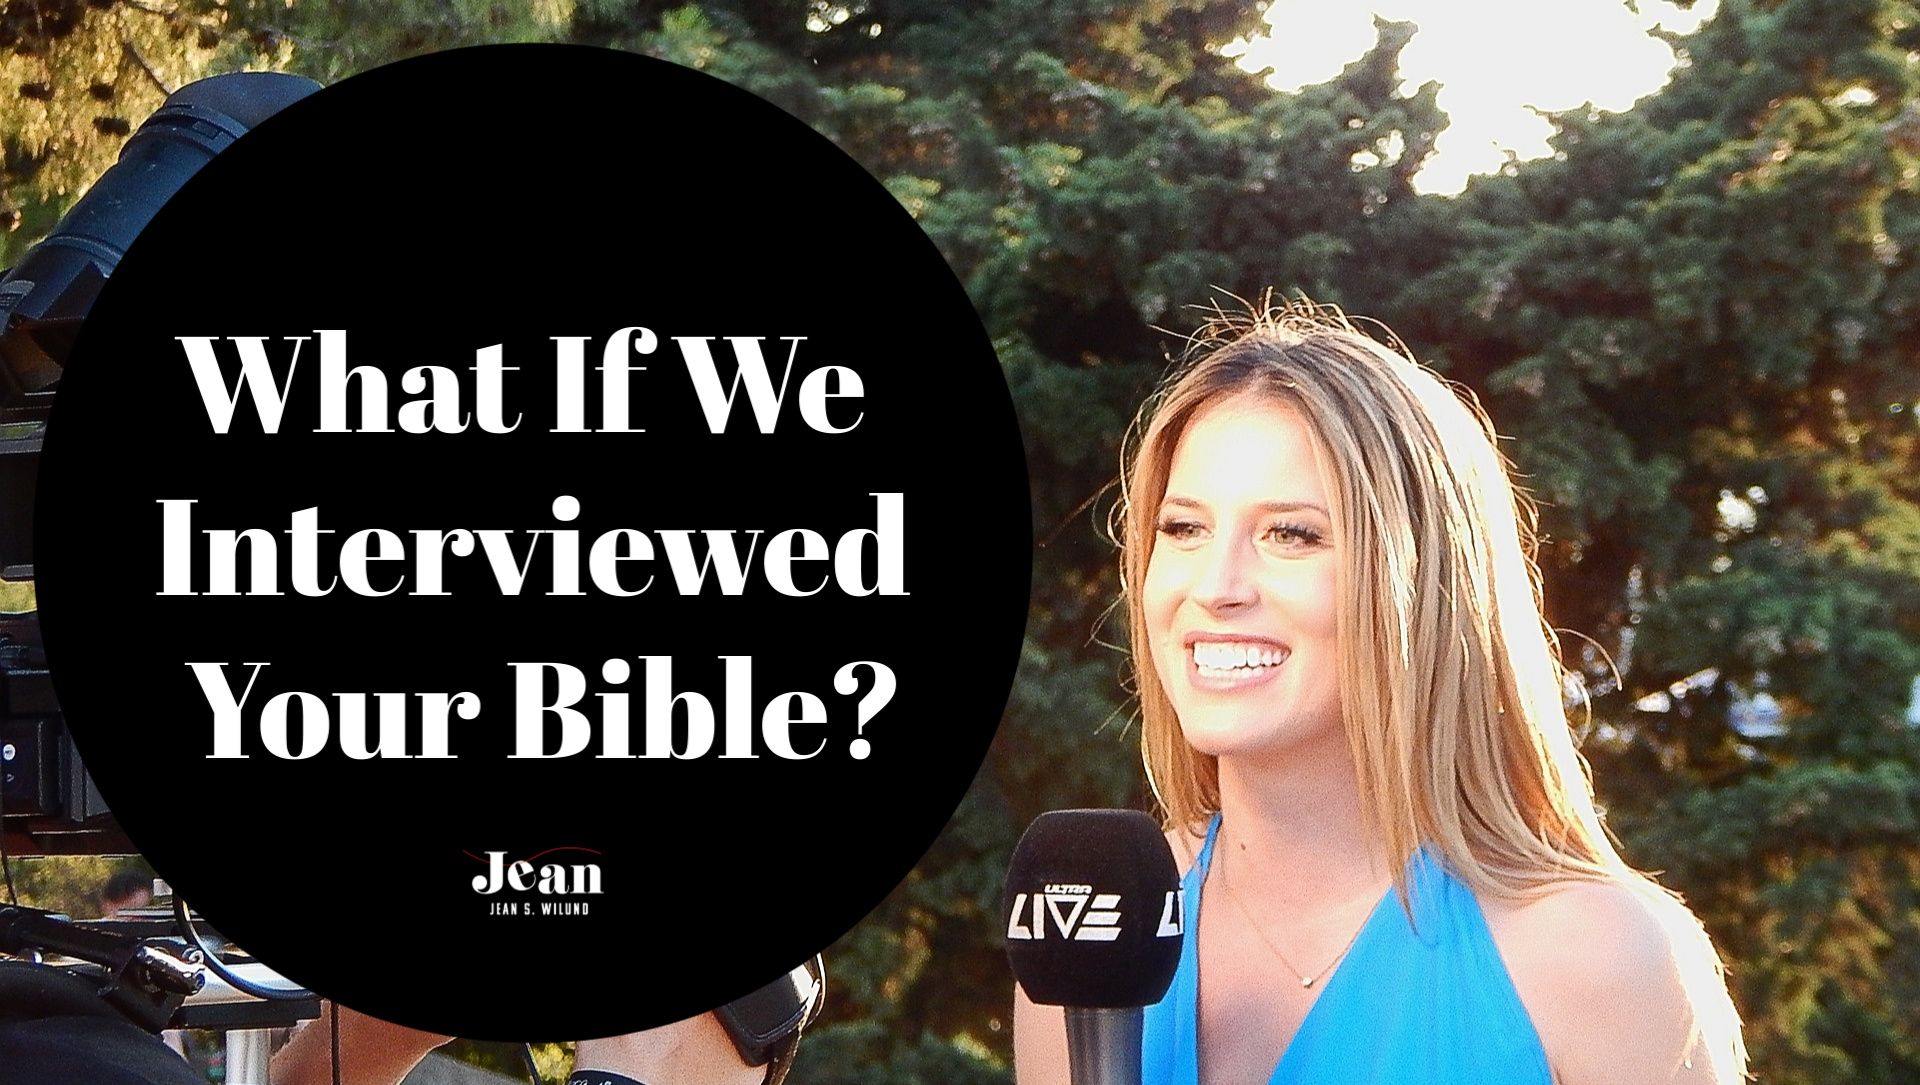 What if we interviewed your Bible? What would it say about your relationship with God? (by Jean Wilund @ JeanWilund.com)